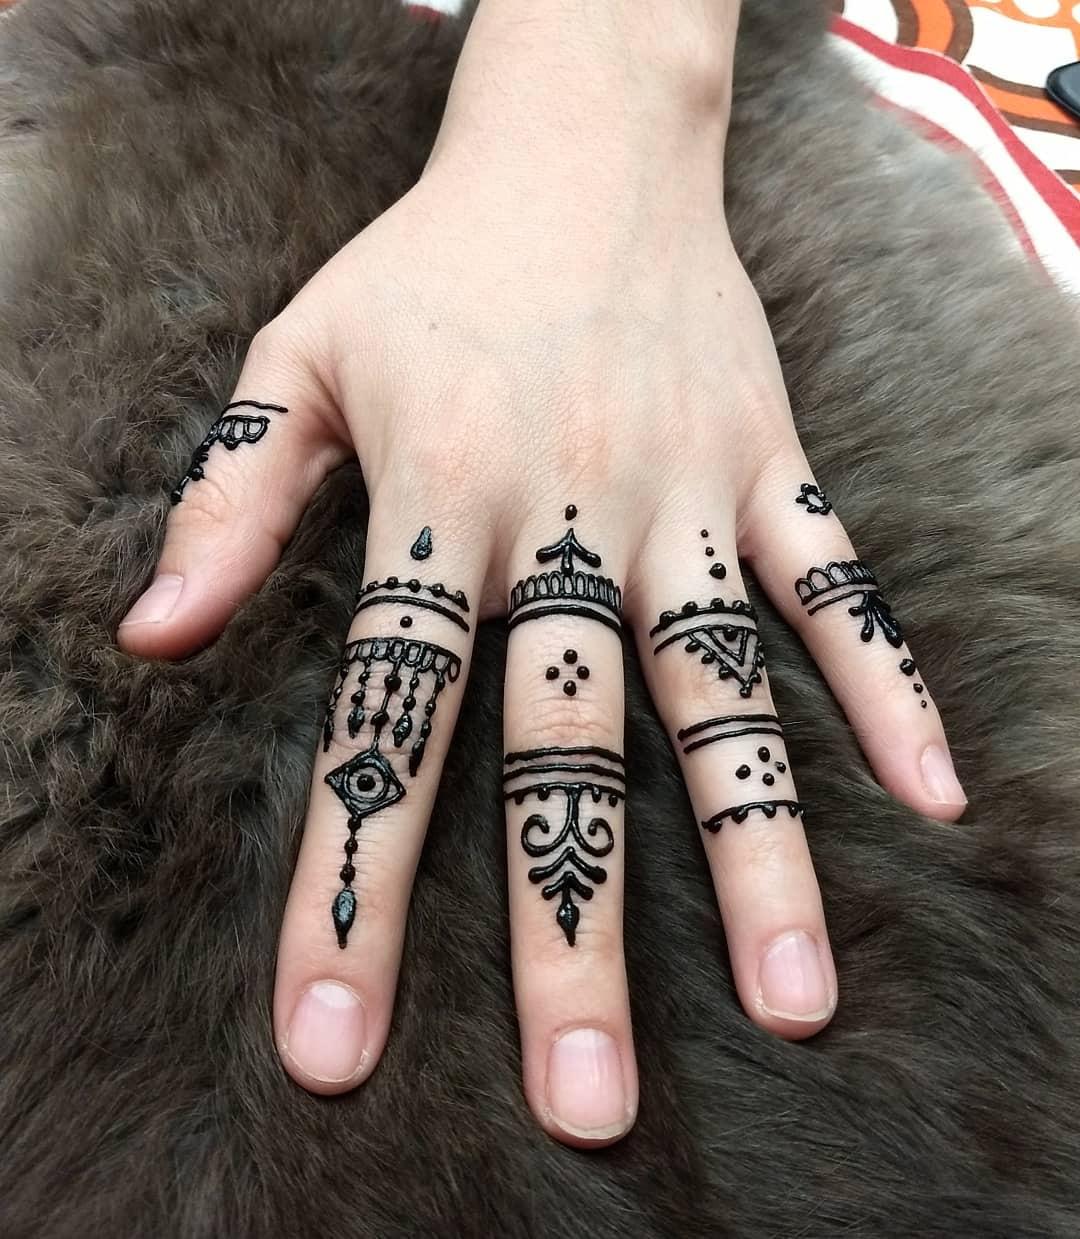 The Best and Simple Mehandi Designs for Hands For The Upcoming Year! by  Riya Jain - Issuu